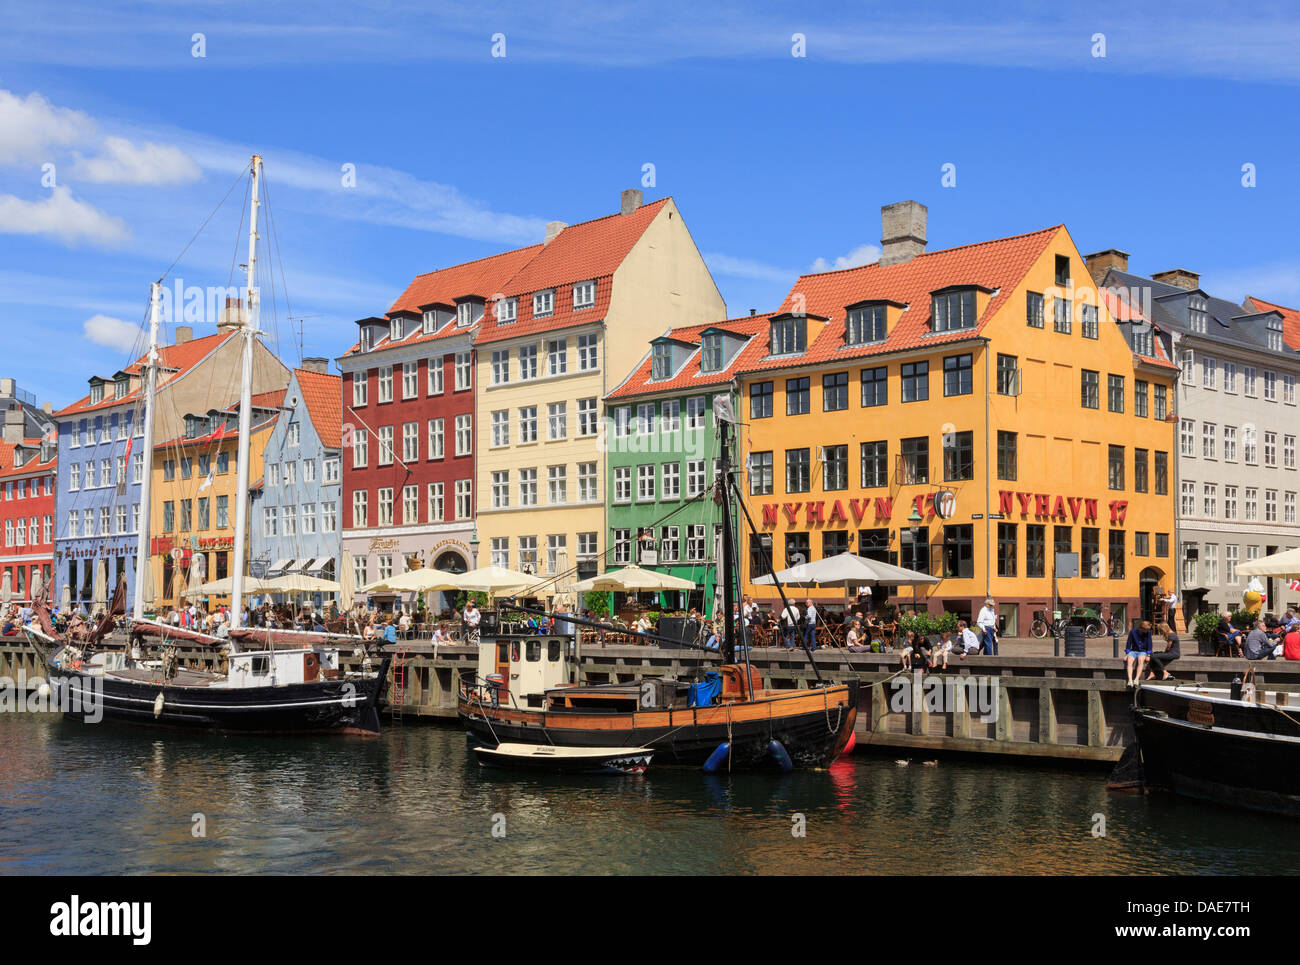 Old wooden boats moored on canal by colourful 17th century buildings on waterfront busy with people in old city. Nyhavn Copenhagen Denmark Stock Photo